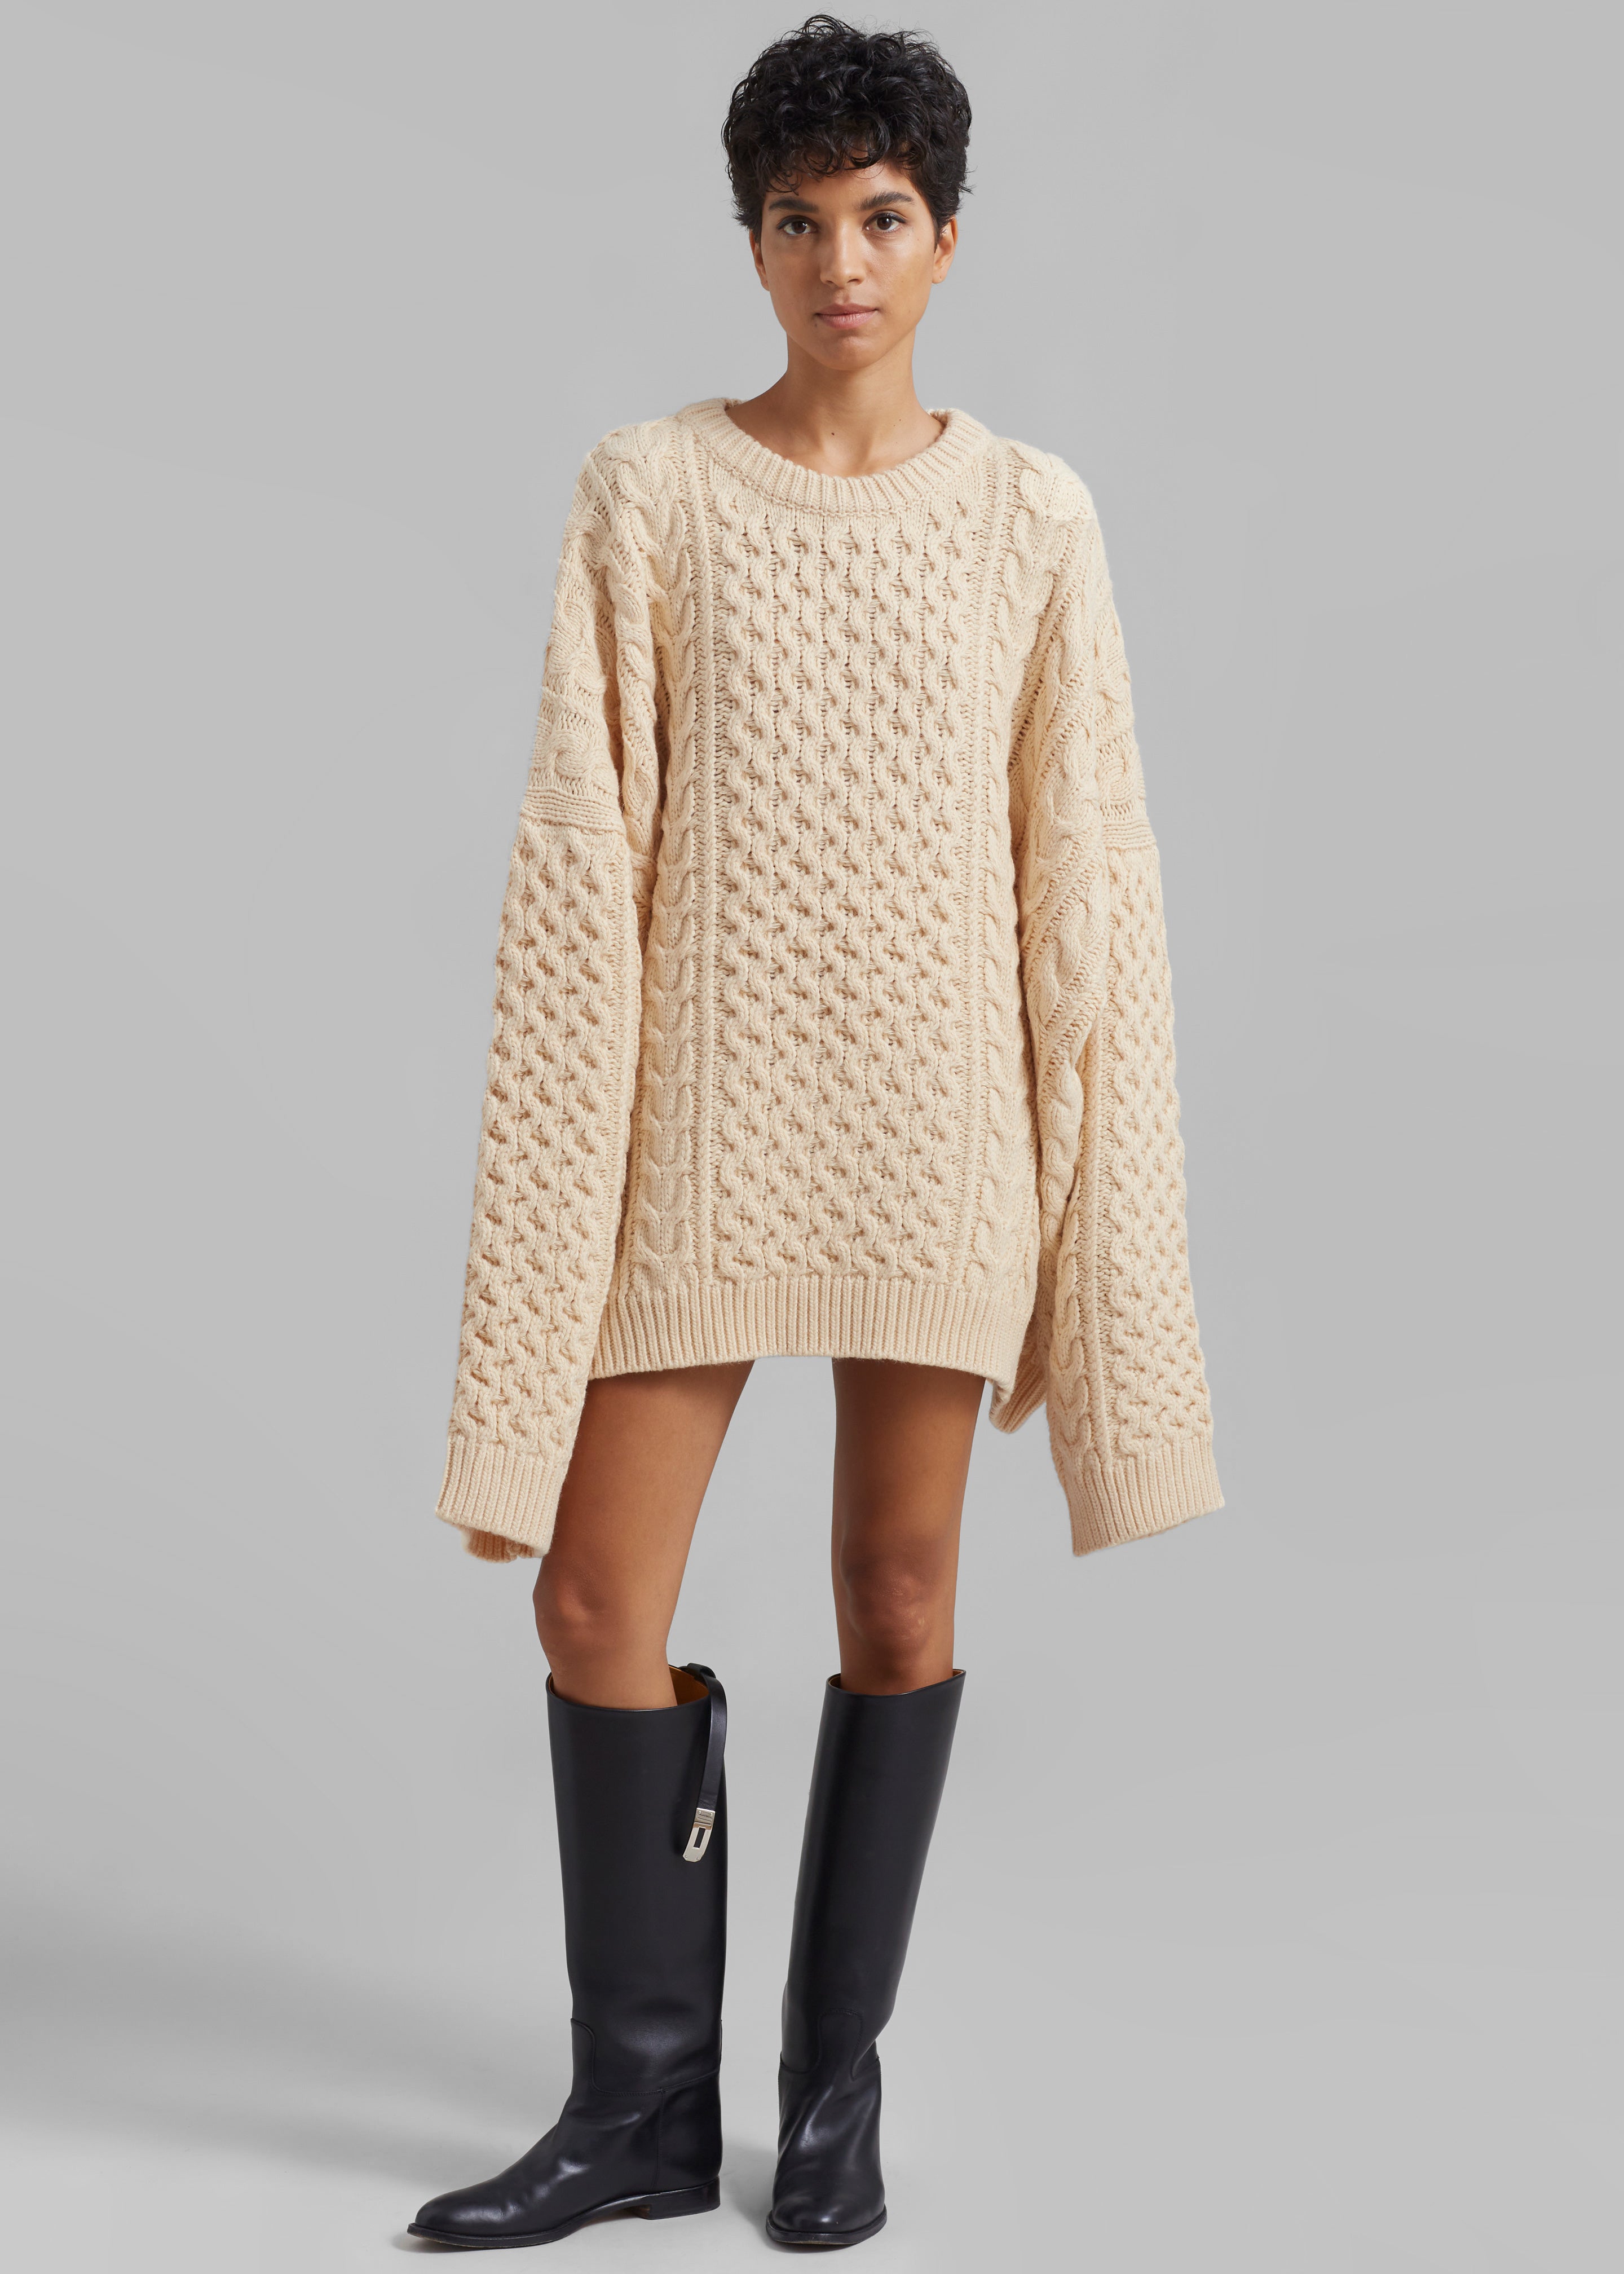 Pailey Braided Sweater - Cream – The Frankie Shop